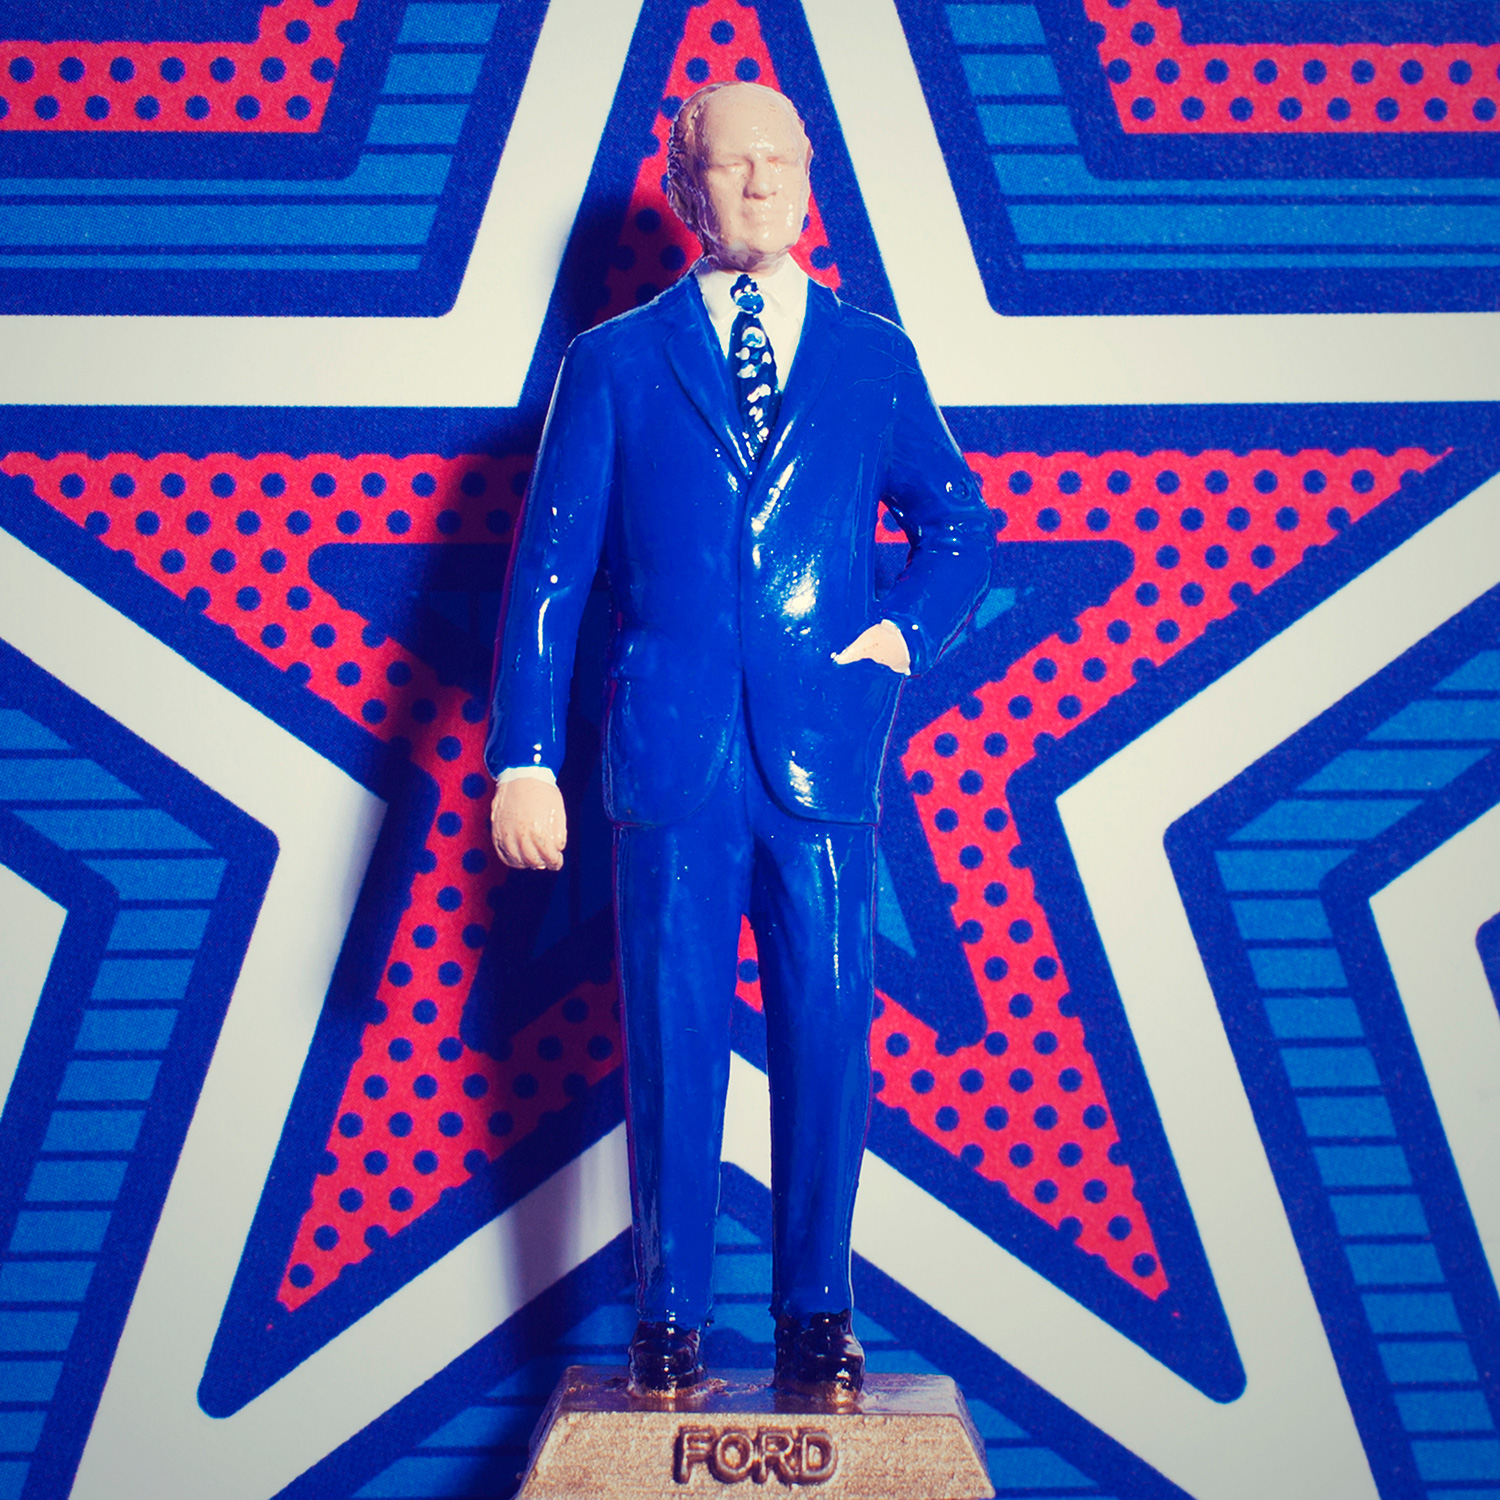 Gerald Ford: It’s personal